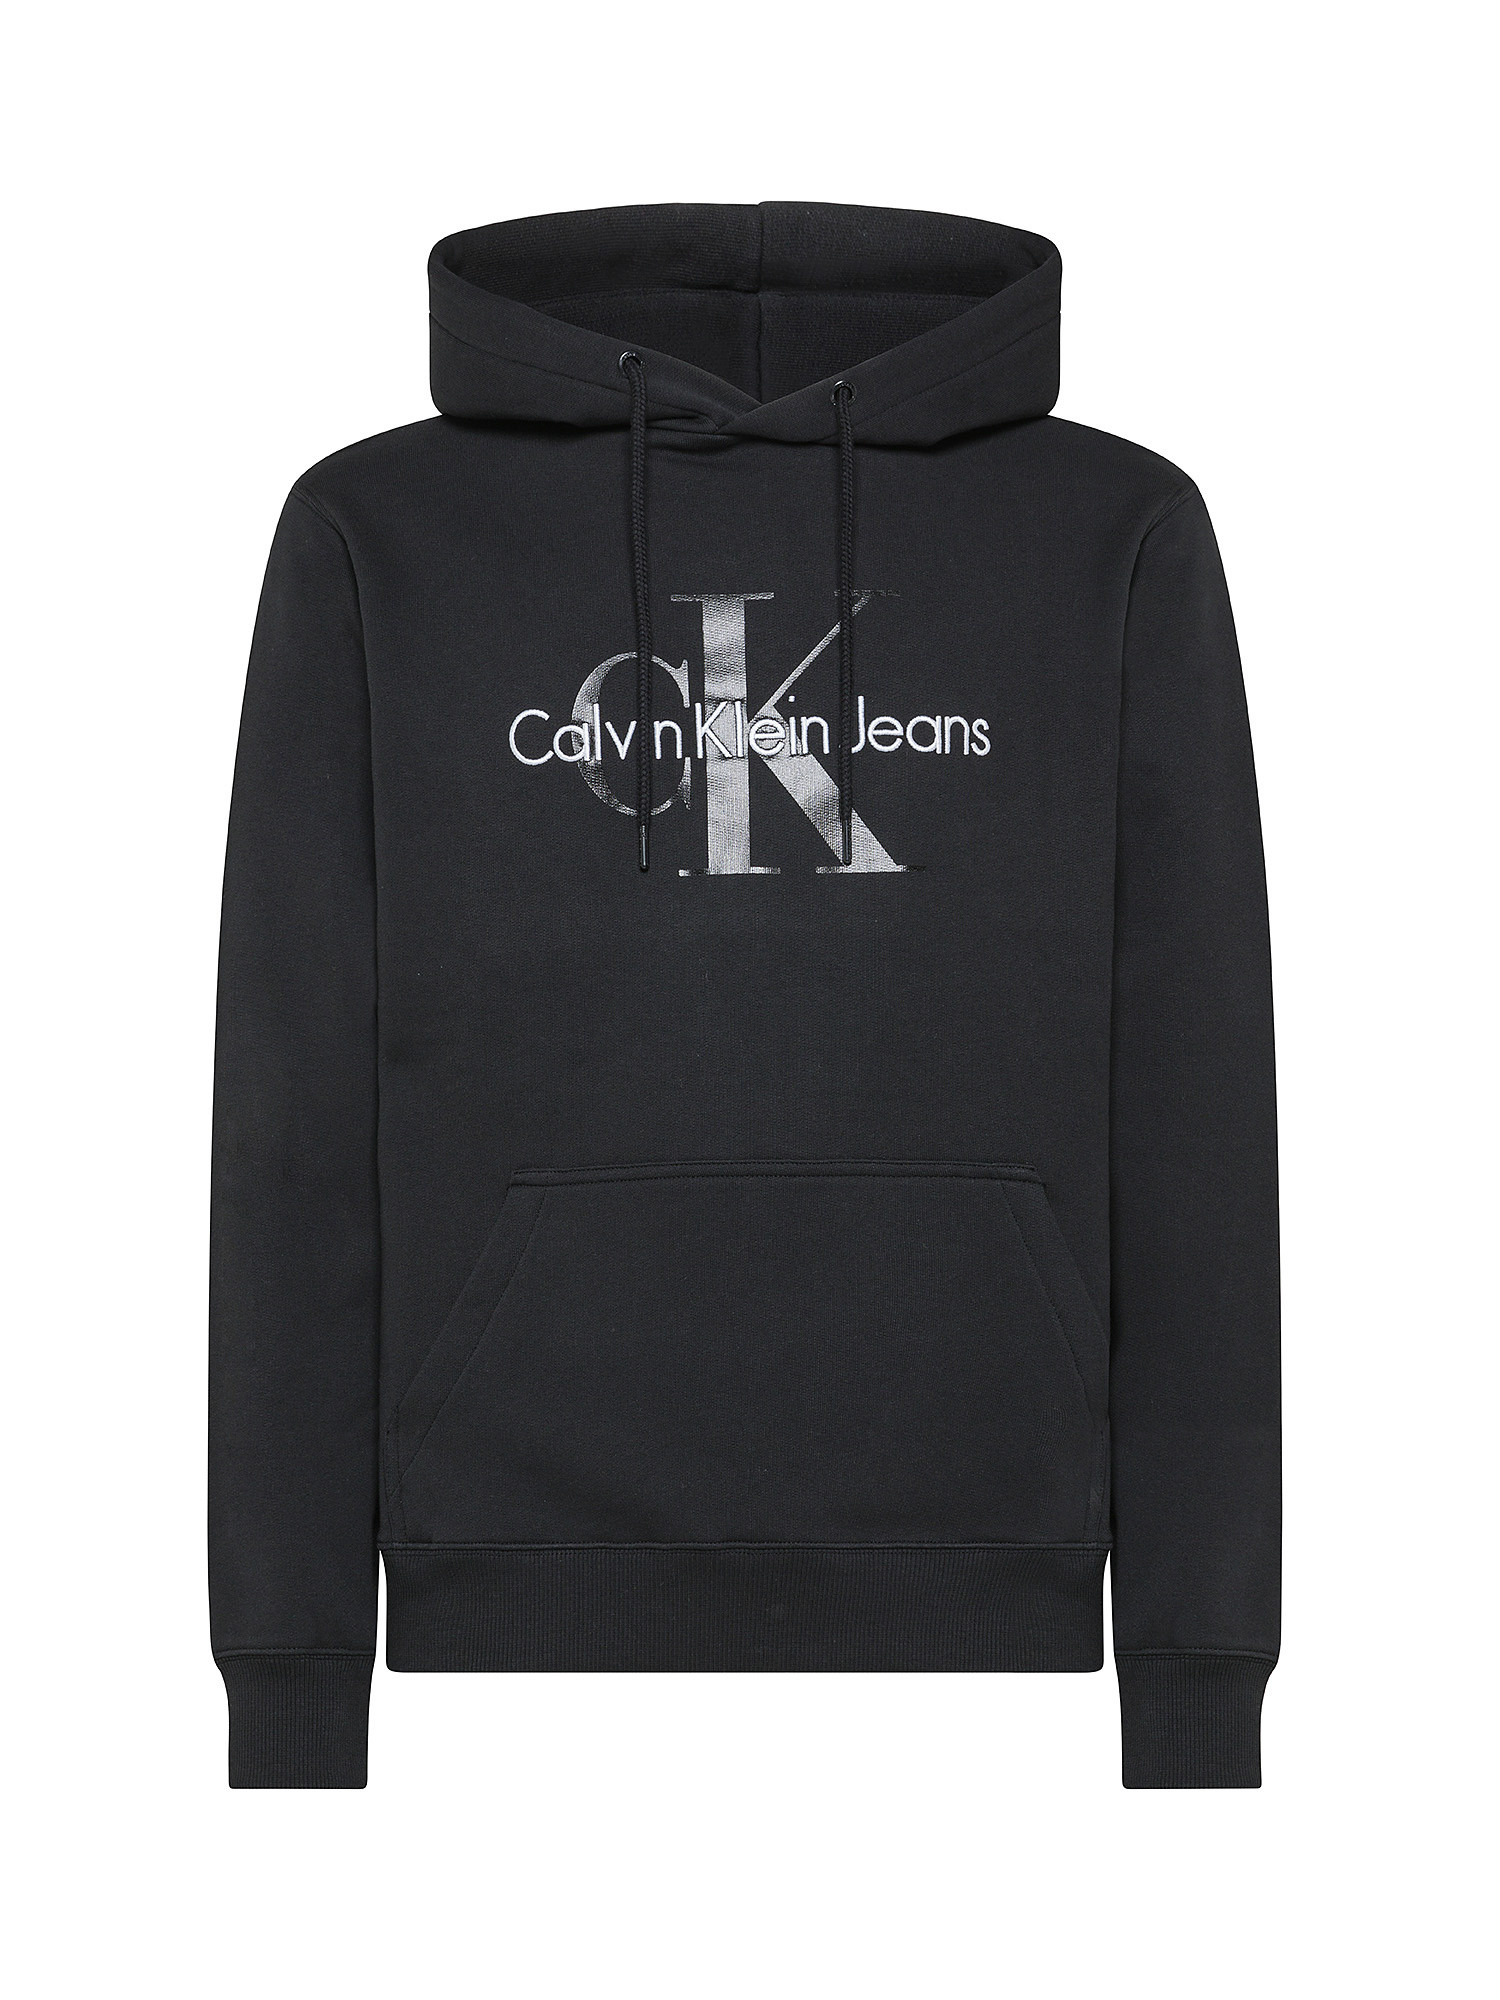 Calvin Klein Jeans -  Cotton hooded sweatshirt with logo, Black, large image number 0